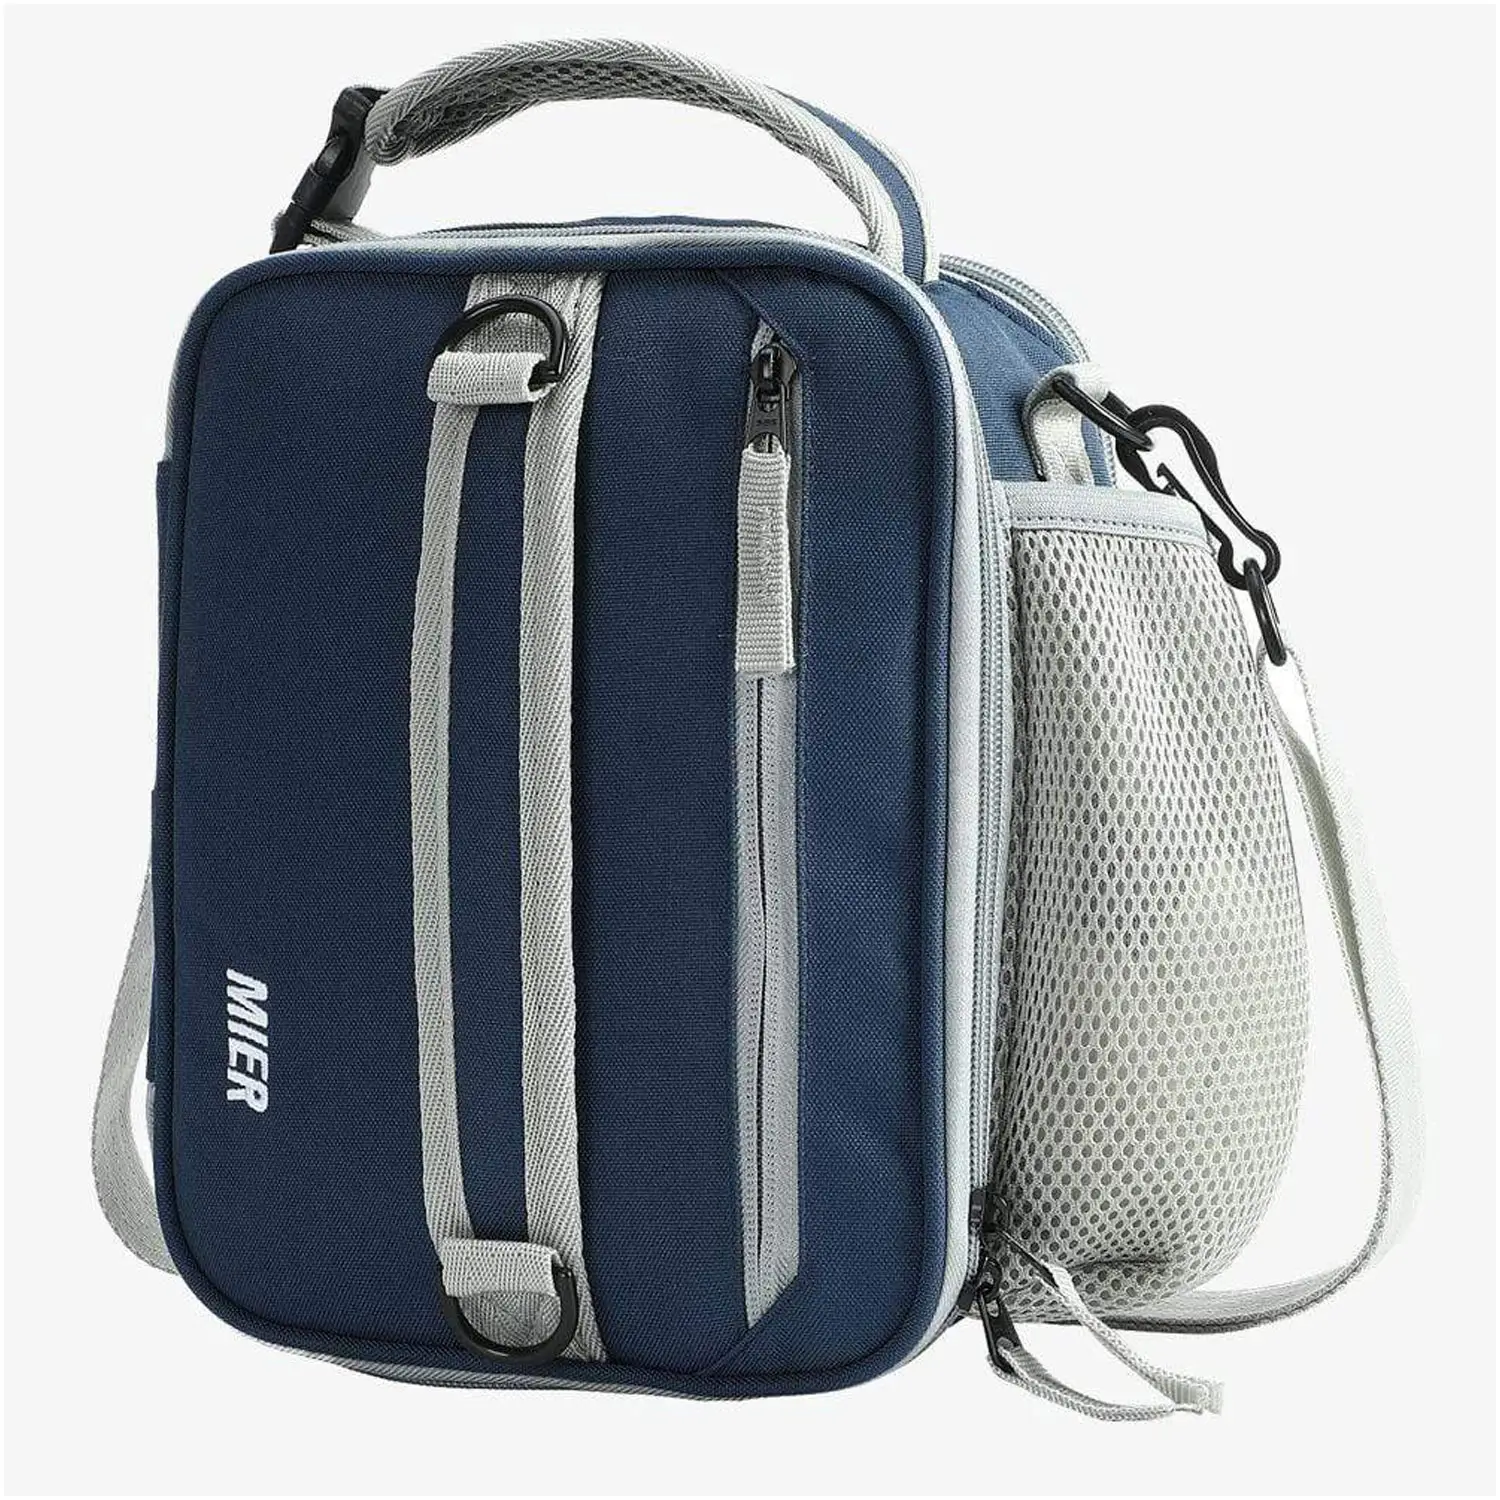 Expandable Lunch Bag Insulated Lunch Box for Men Boys Teens